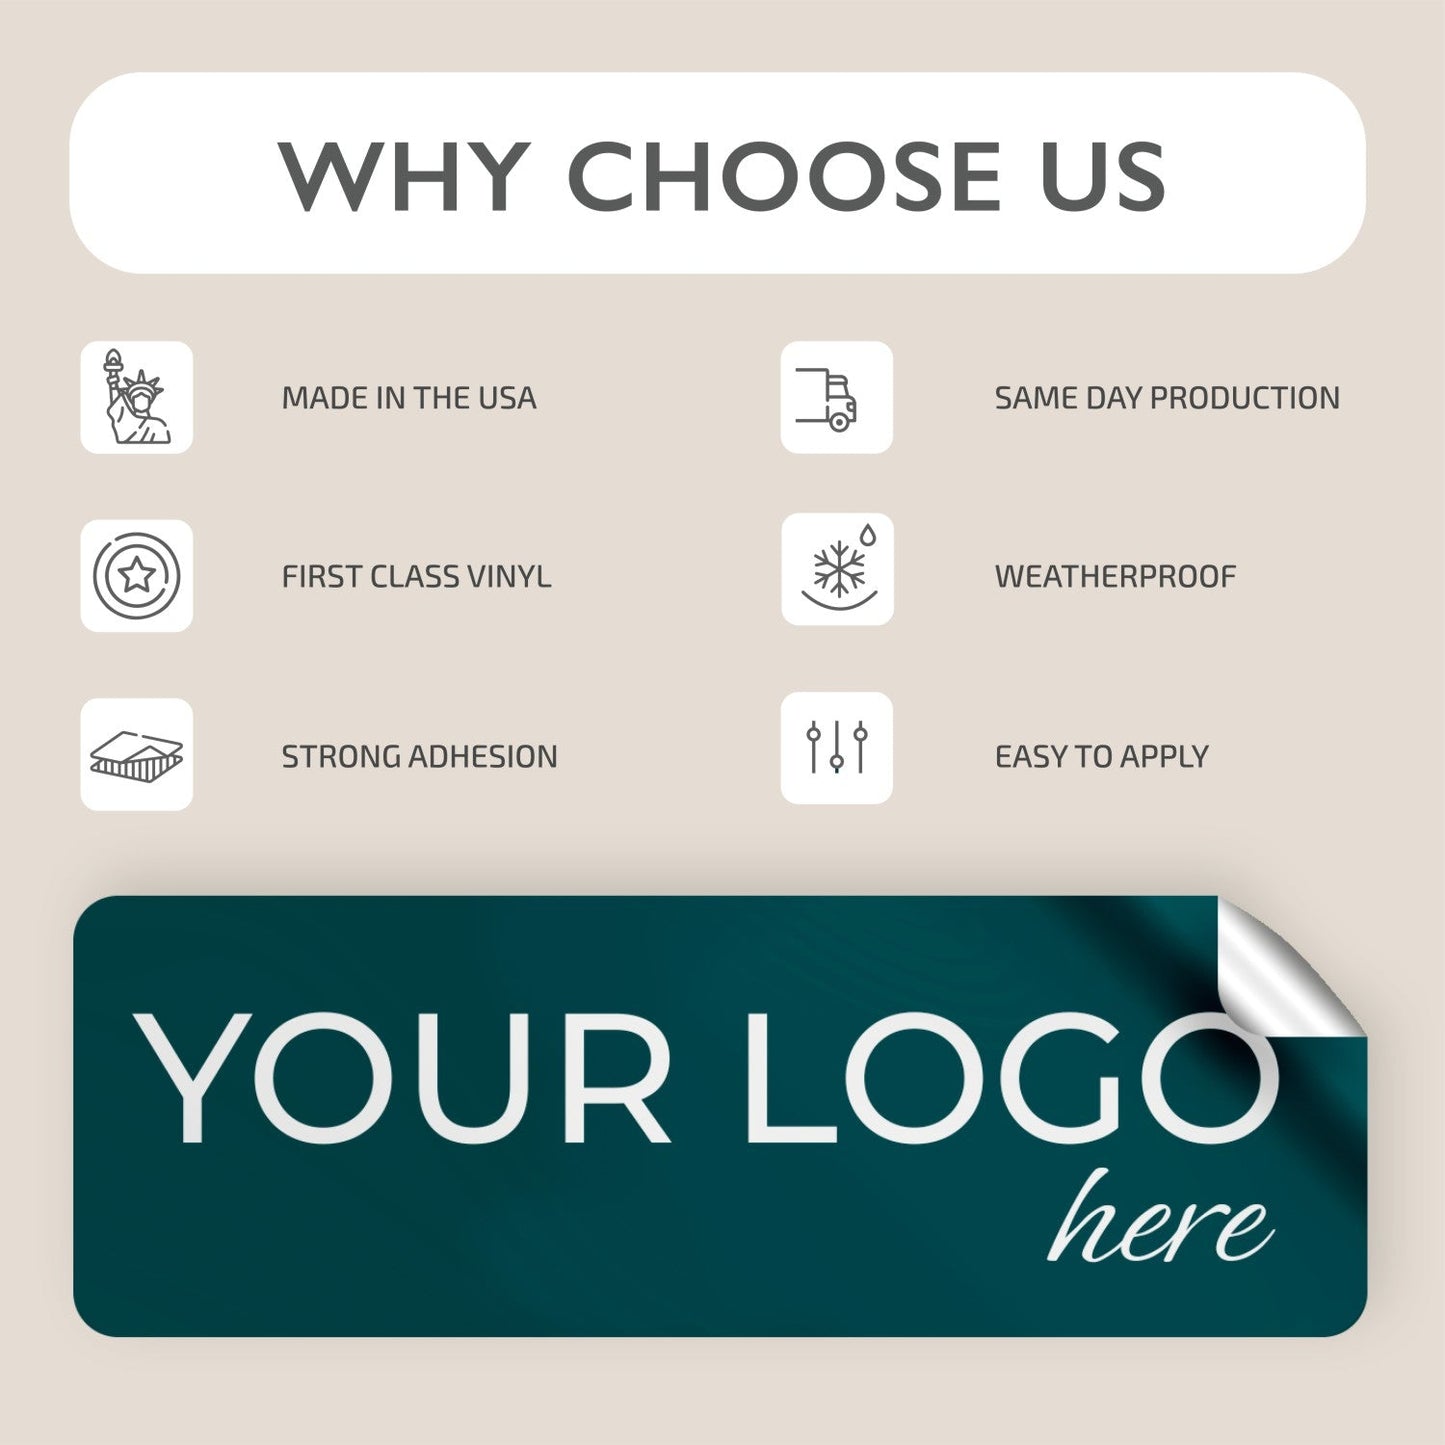 Personalized Business Stickers - Business Stickers with Your Logo - Customizable Stickers for Business Logo - Logo Stickers Customized